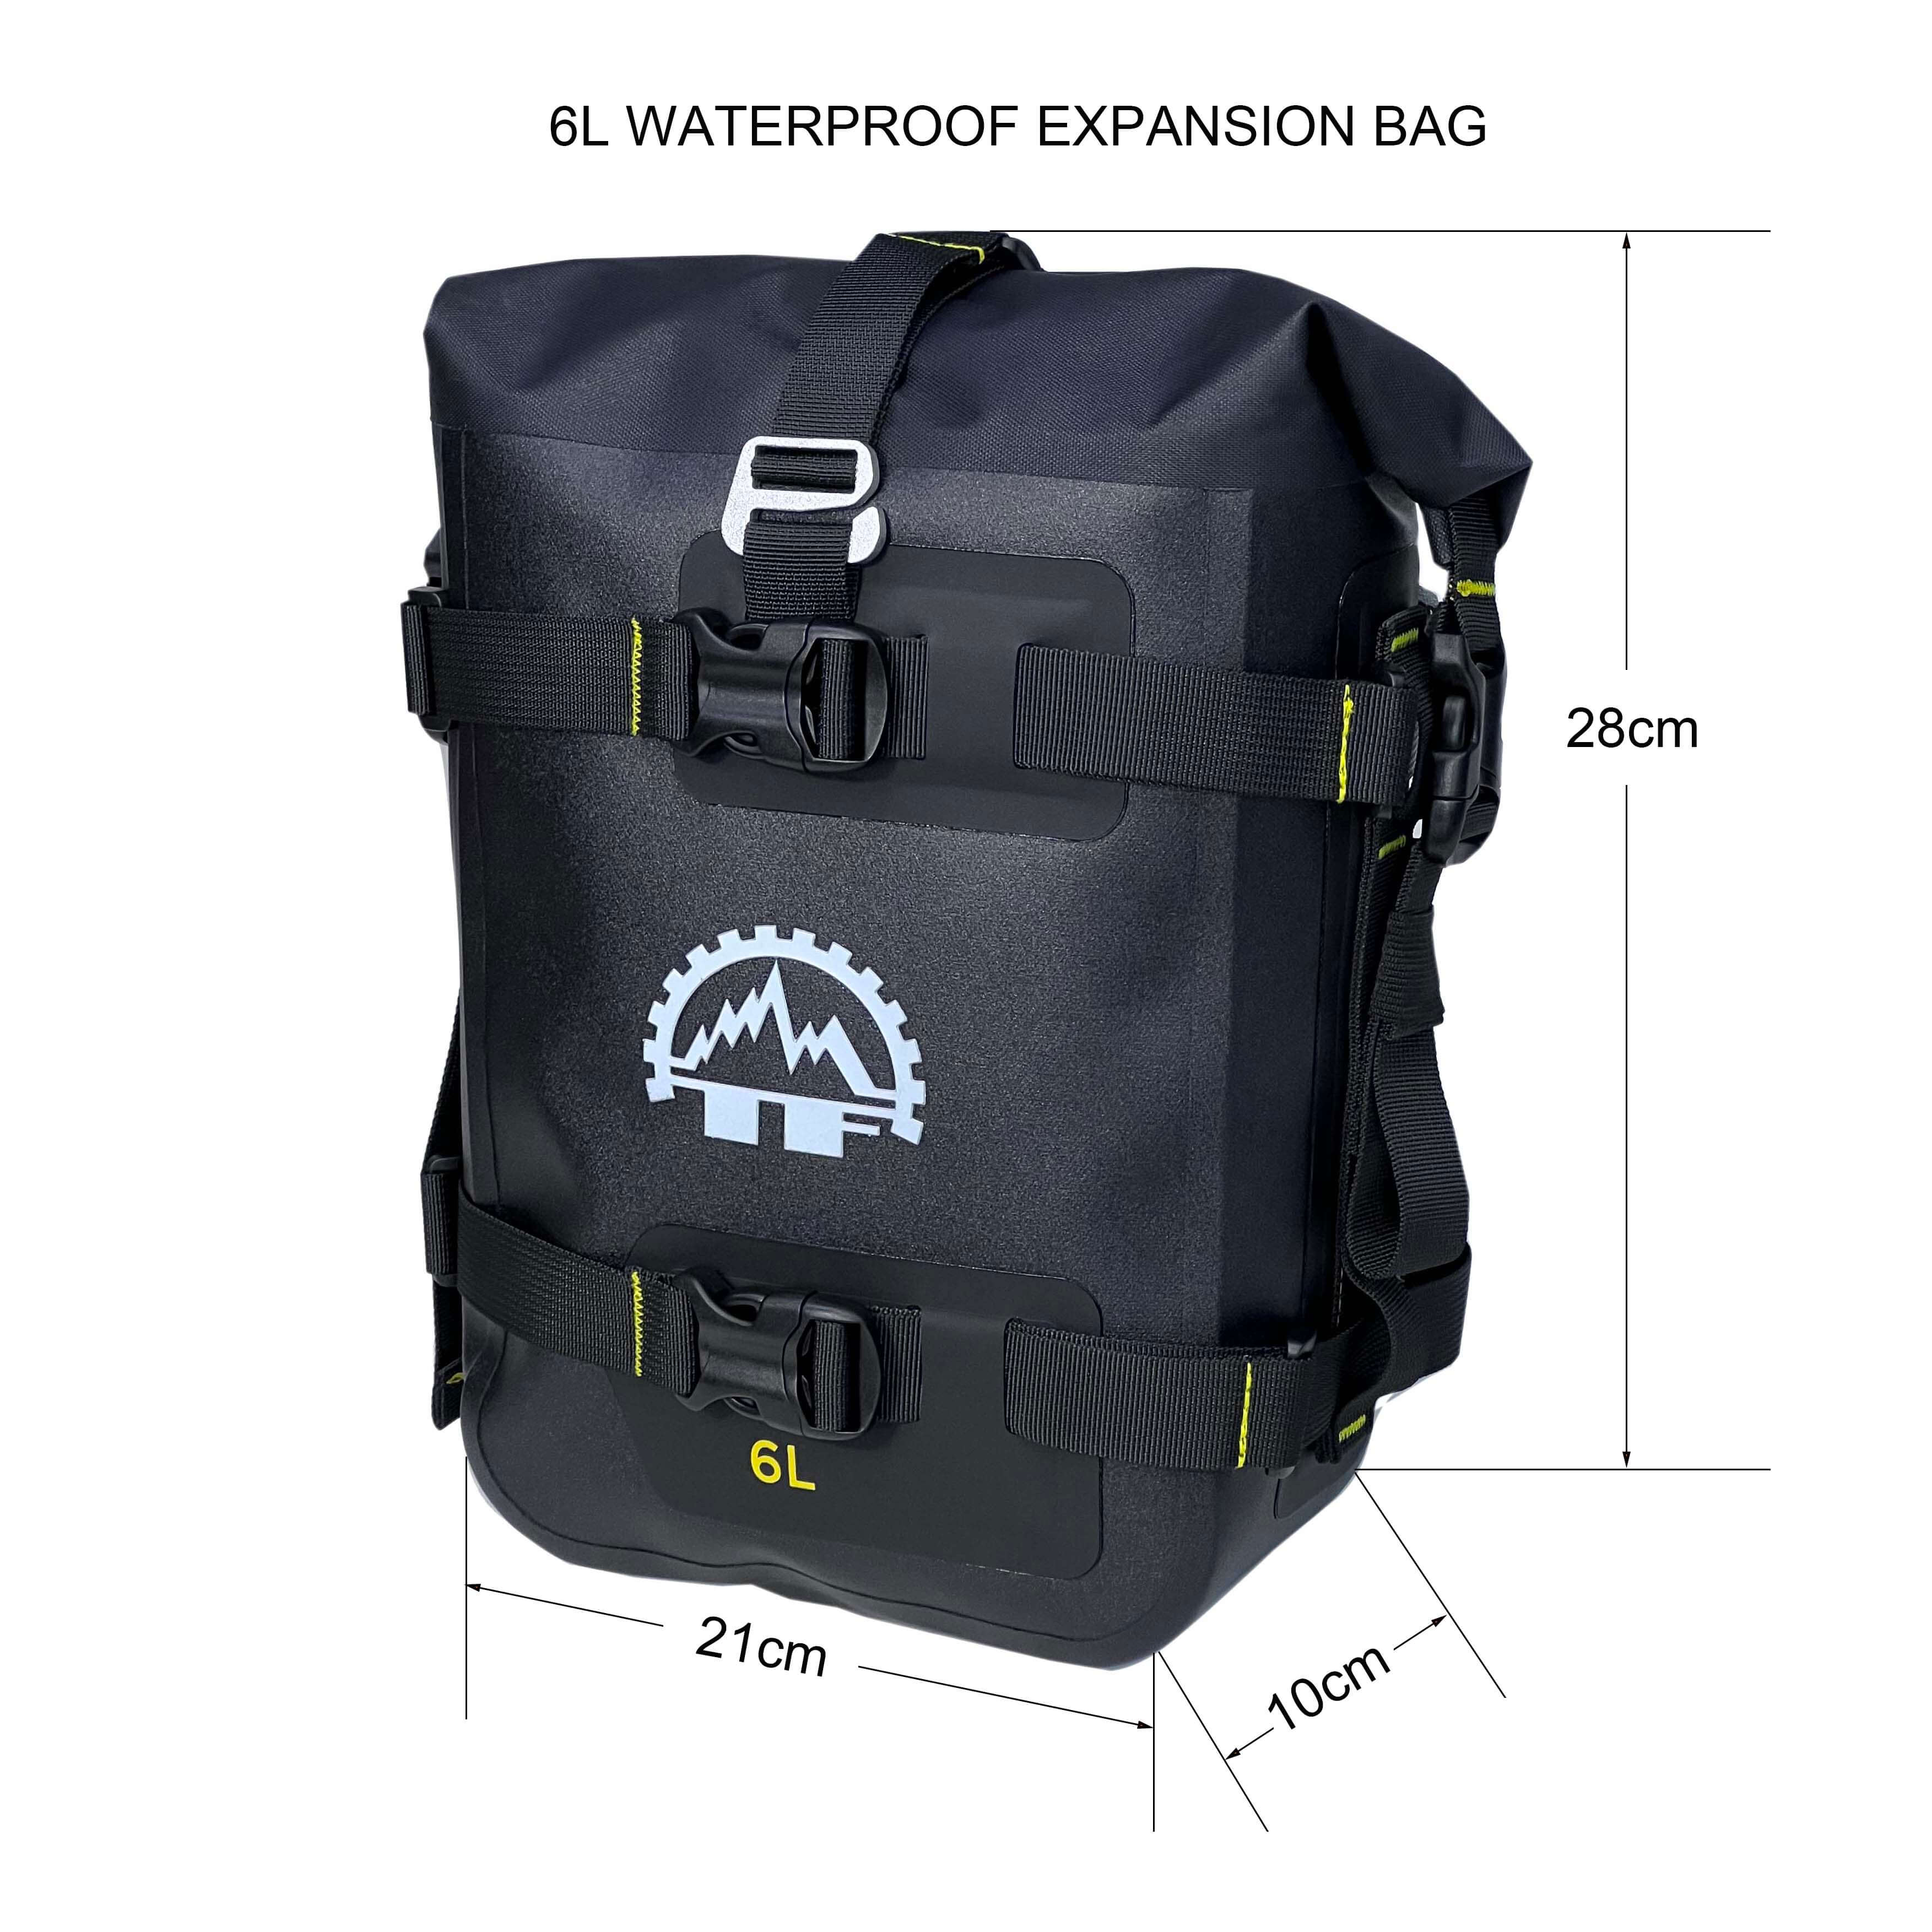 6L Extreme Waterproof Saddle Bags